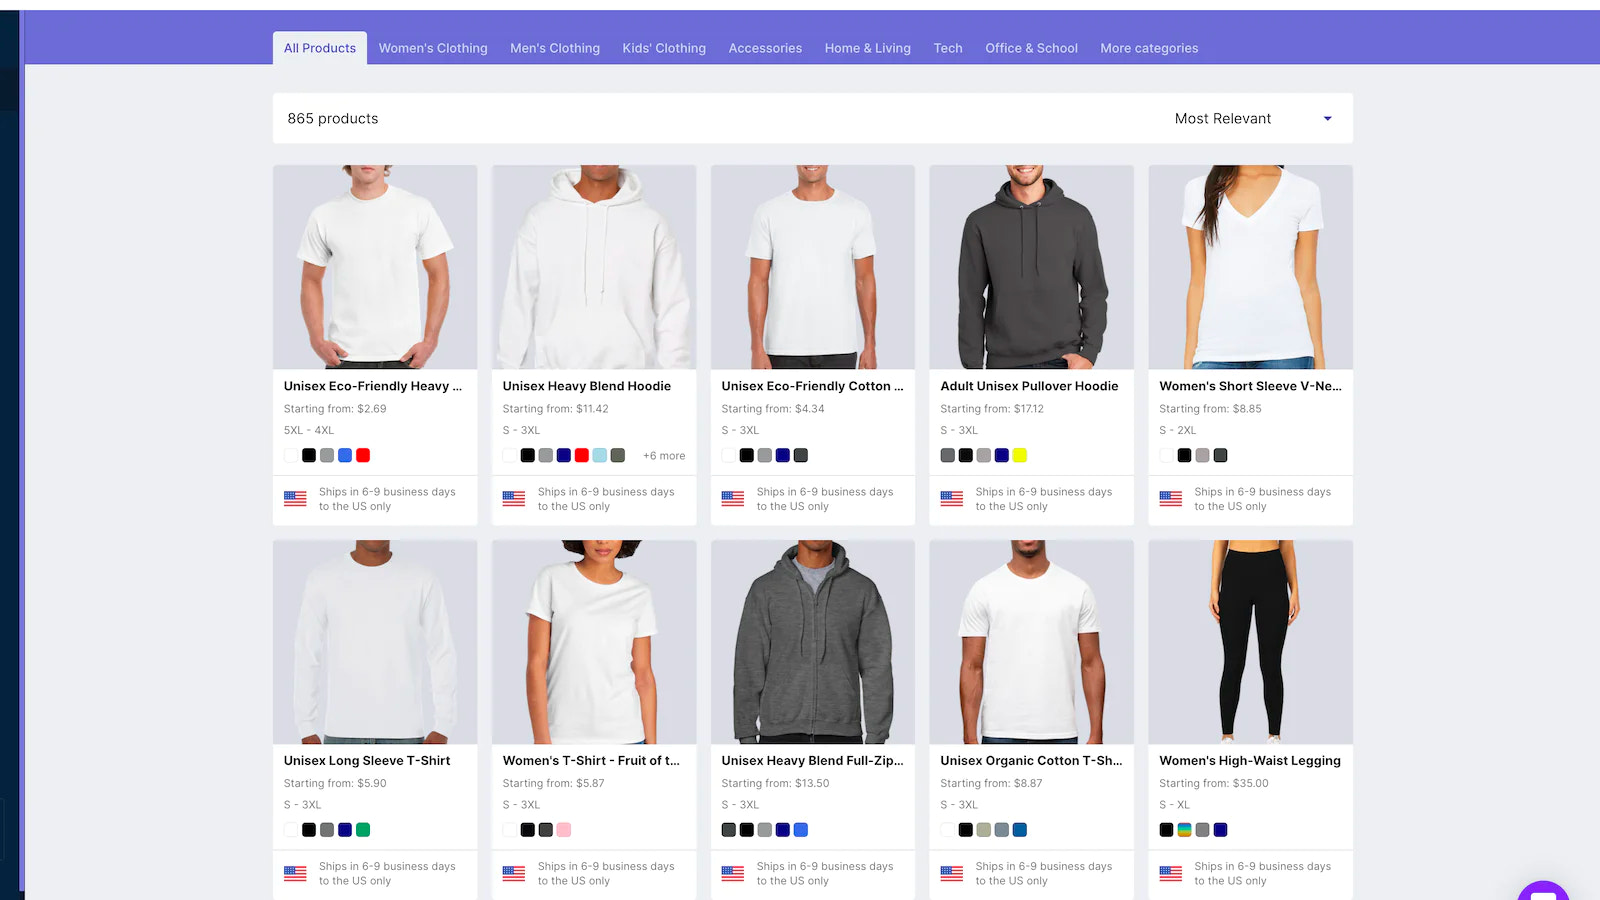 Dropshipping from  UK to  UK, Shopify UK, Fulfilment by .co. uk